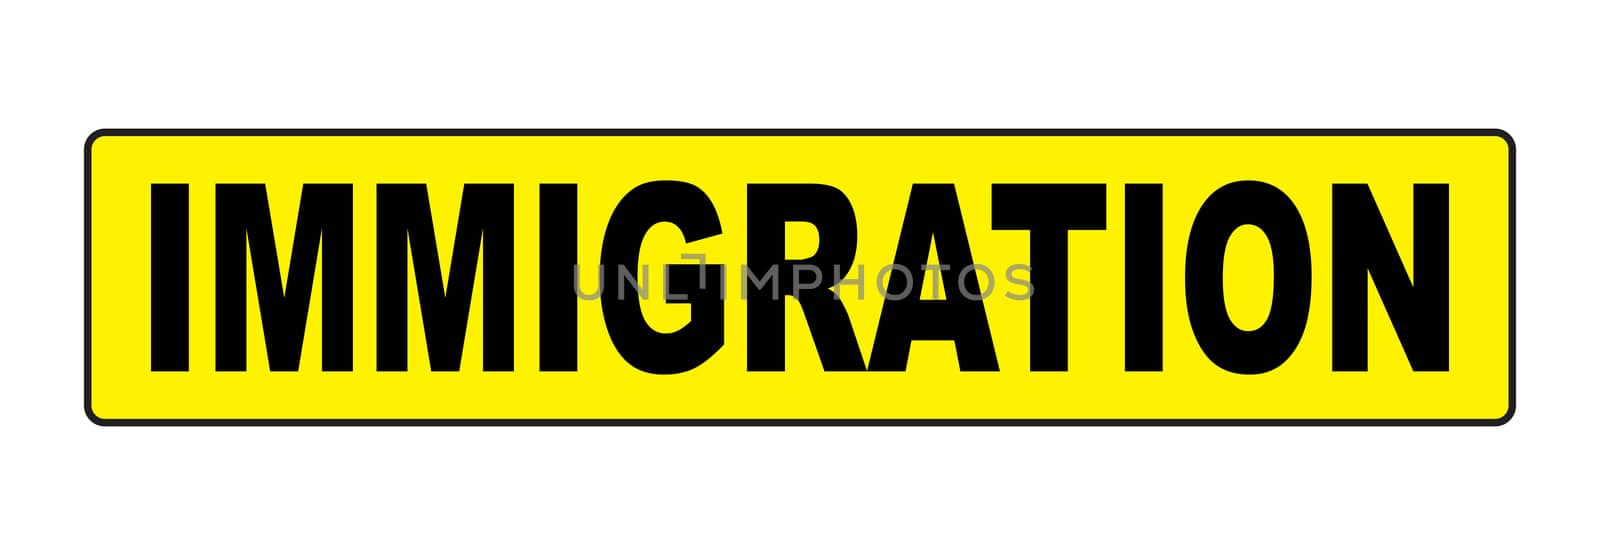 Bright yellow immigration sign over a white background